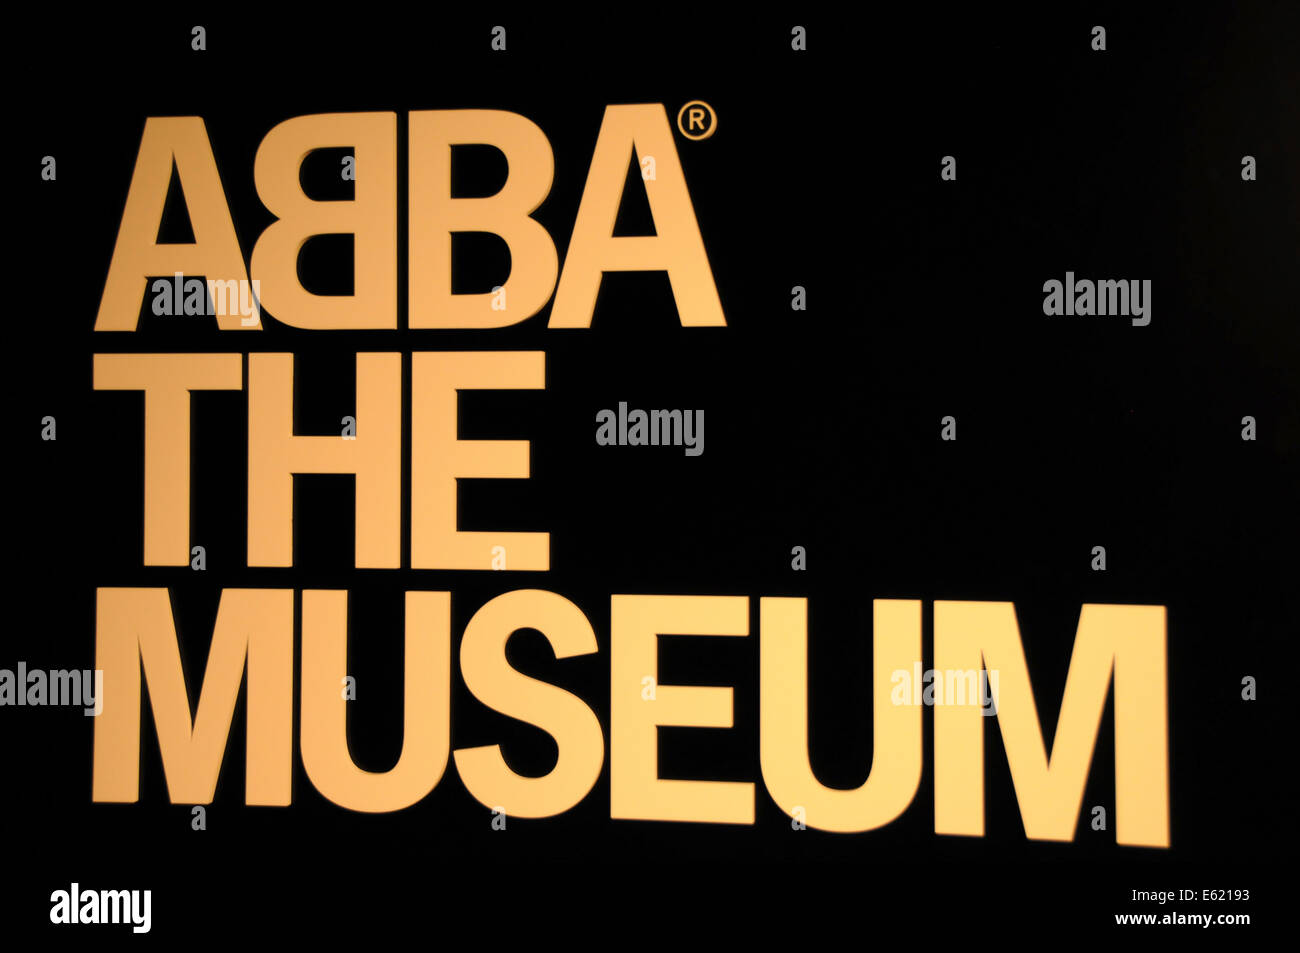 ABBA The Museum is an interactive exhibition about the pop-group ABBA that opened in Stockholm, Sweden in May 2013. Stock Photo